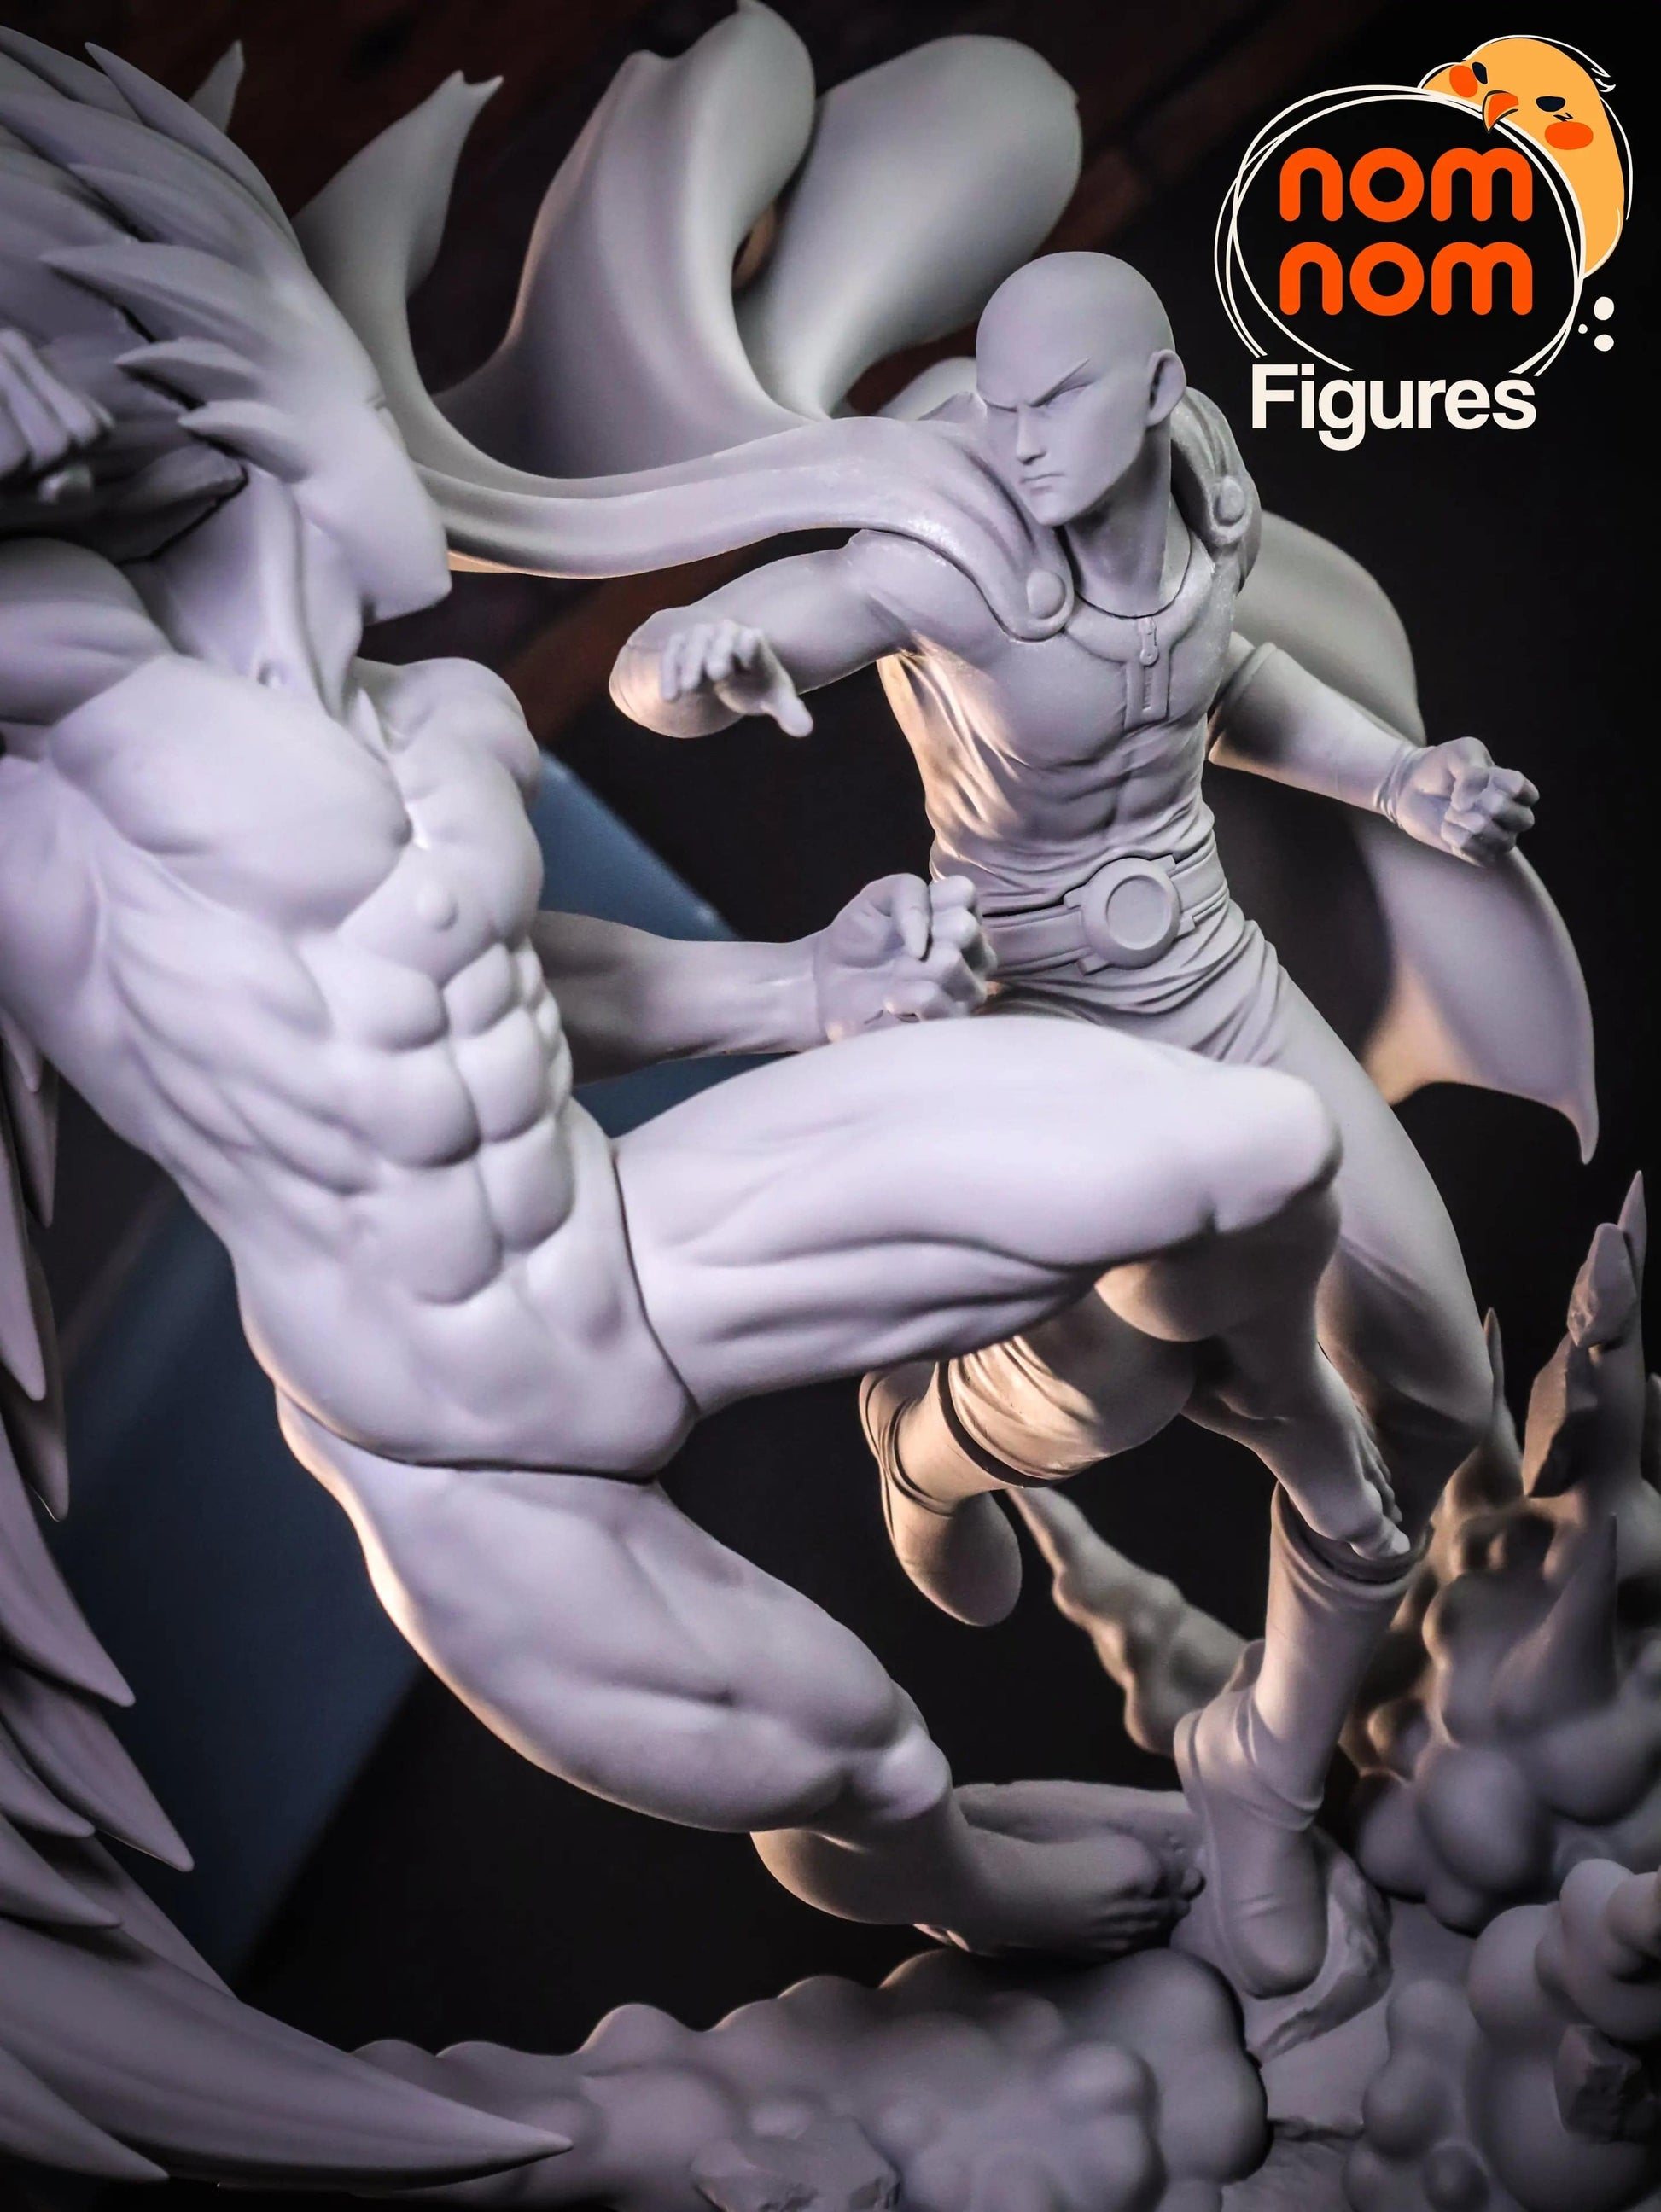 Epic Battle Settled with One Punch | Resin Garage Kit Sculpture Anime Video Game Fan Art Statue | Nomnom Figures - Tattles Told 3D